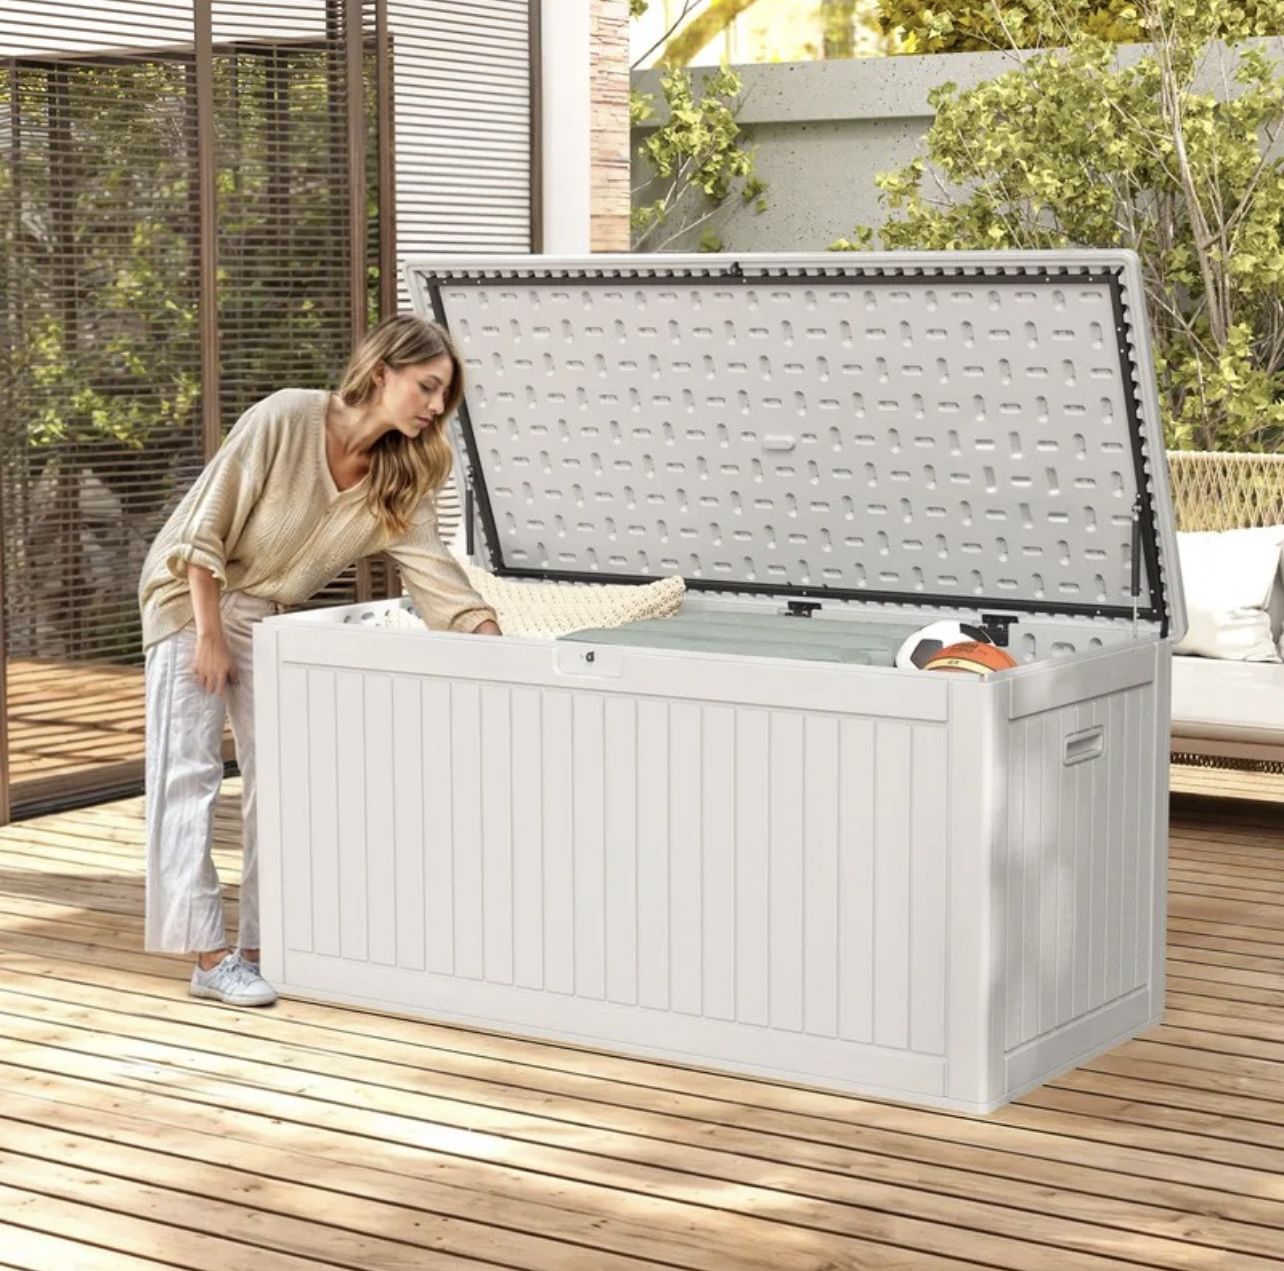 OUTDOOR DECK BOX XXXL SIZE 260 GALLONS. WATERPROOF AND LOCKABLE BRAND NEW IN BOX!!!